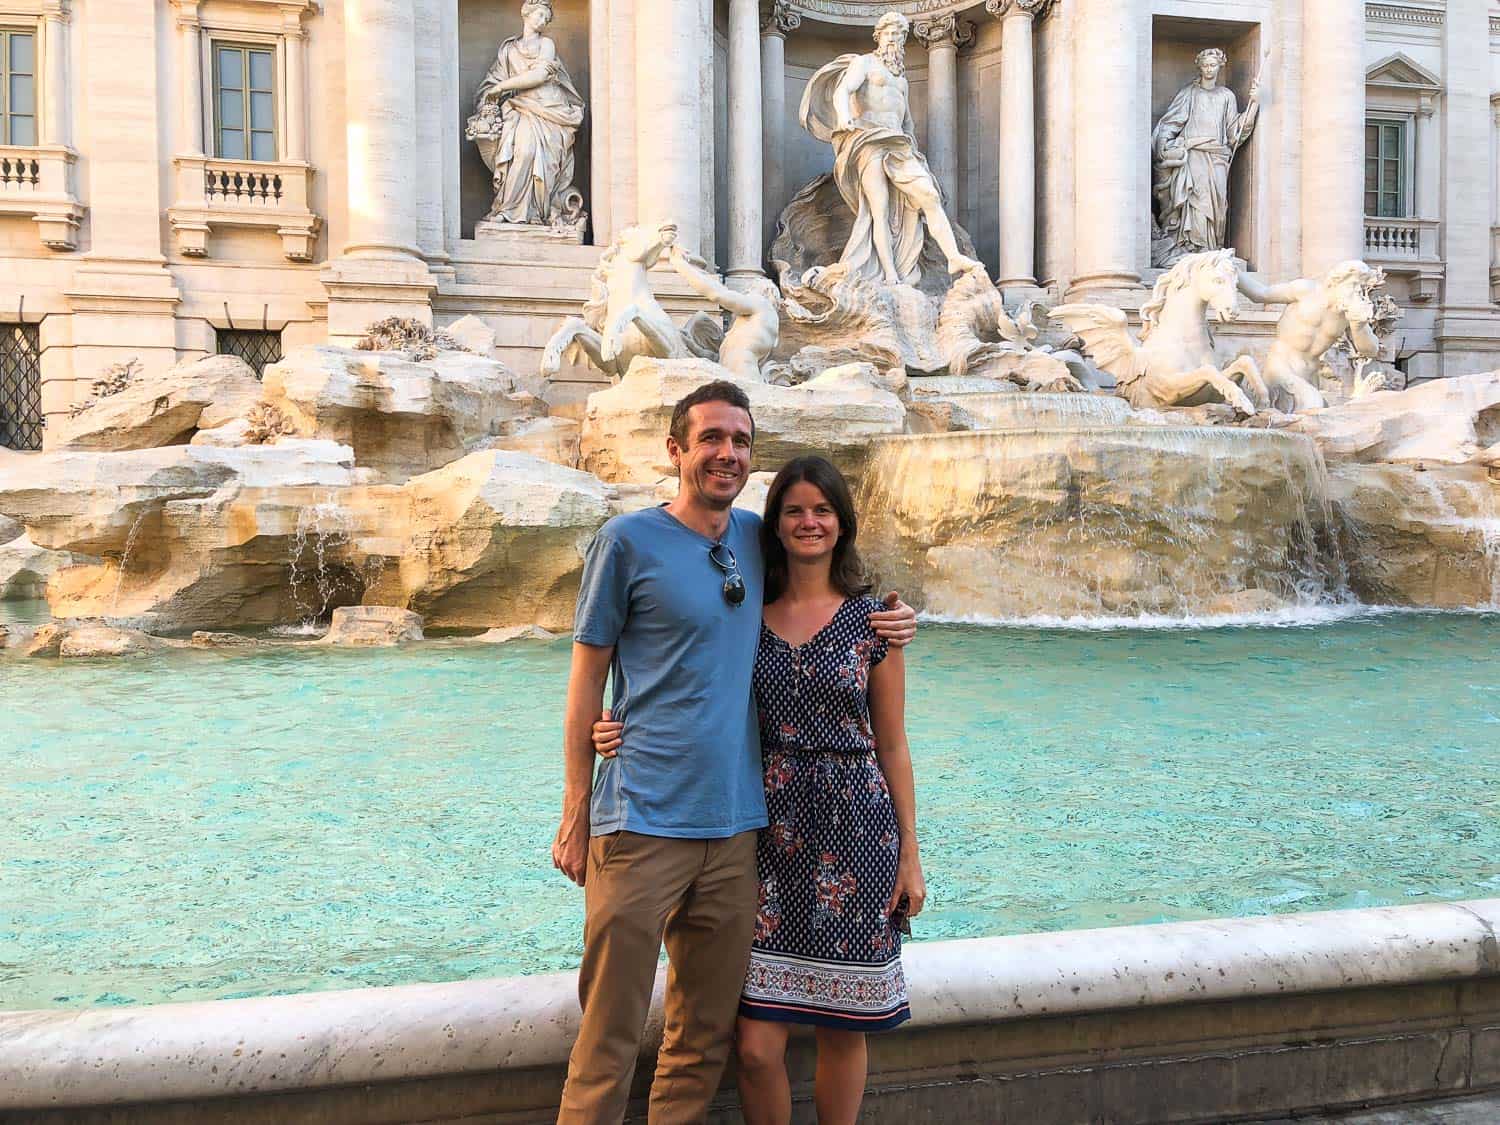 Erin and Simon at the Trevi Fountain, Rome